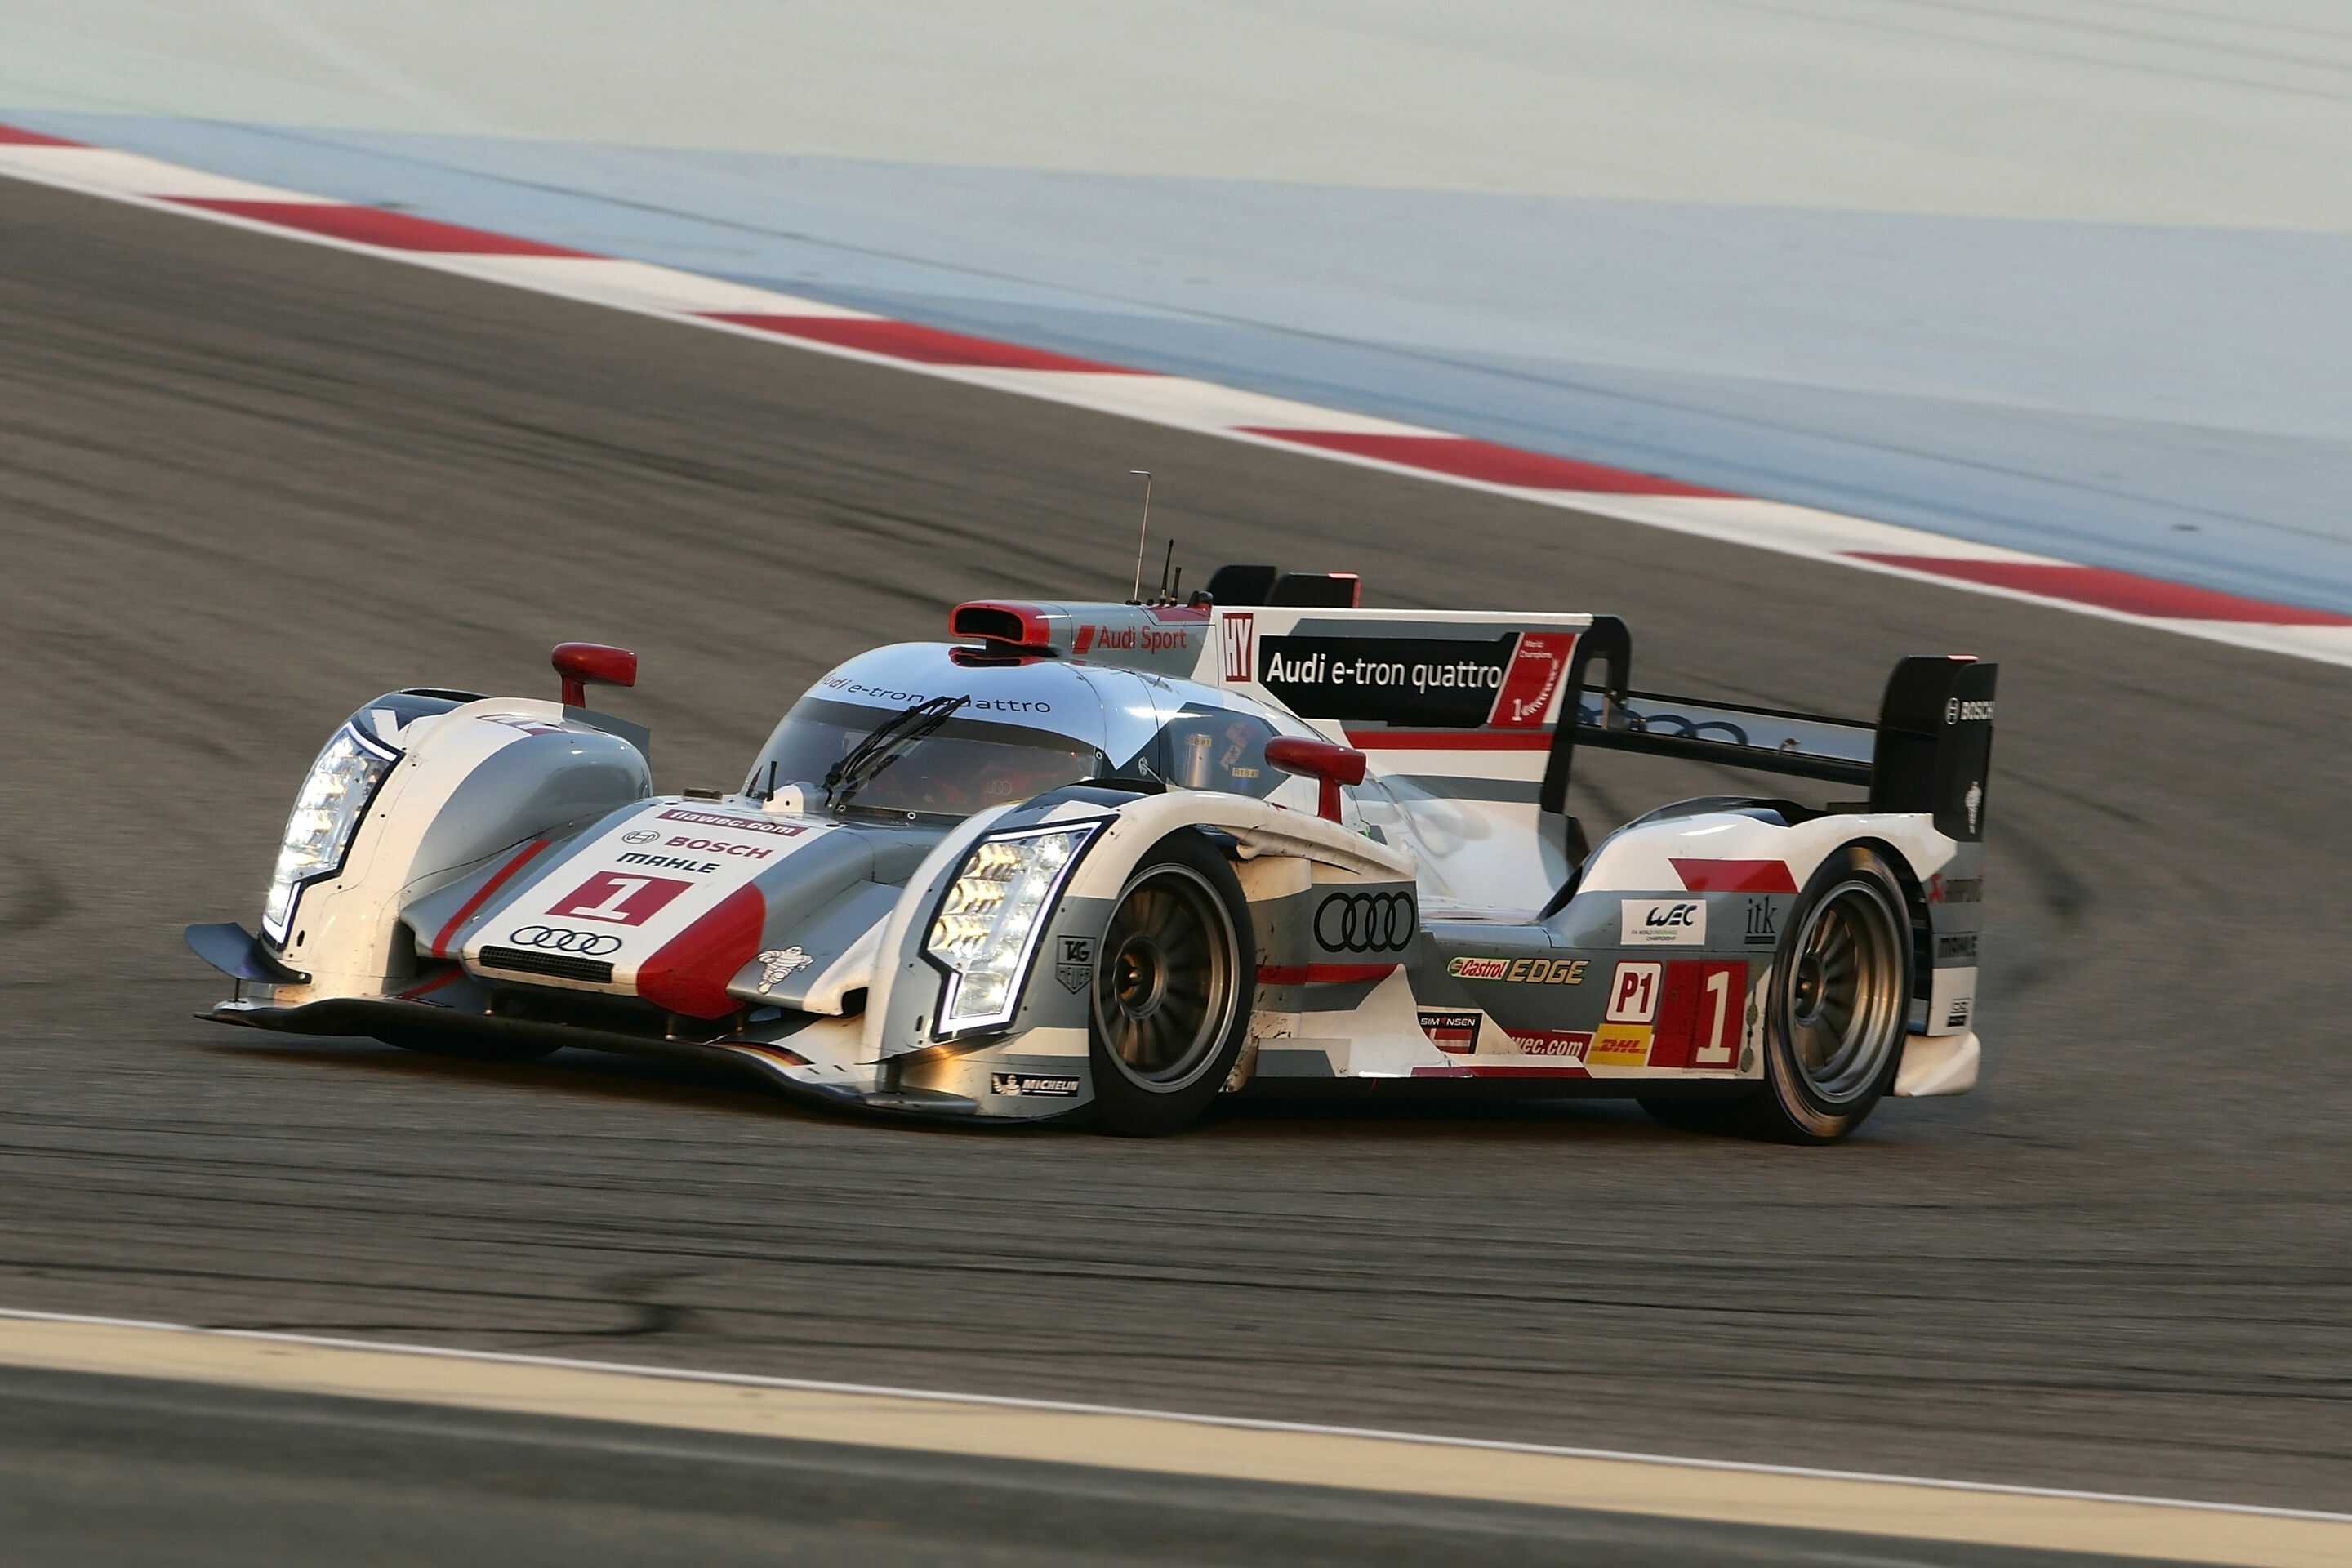 Audi starts from second row in Bahrain